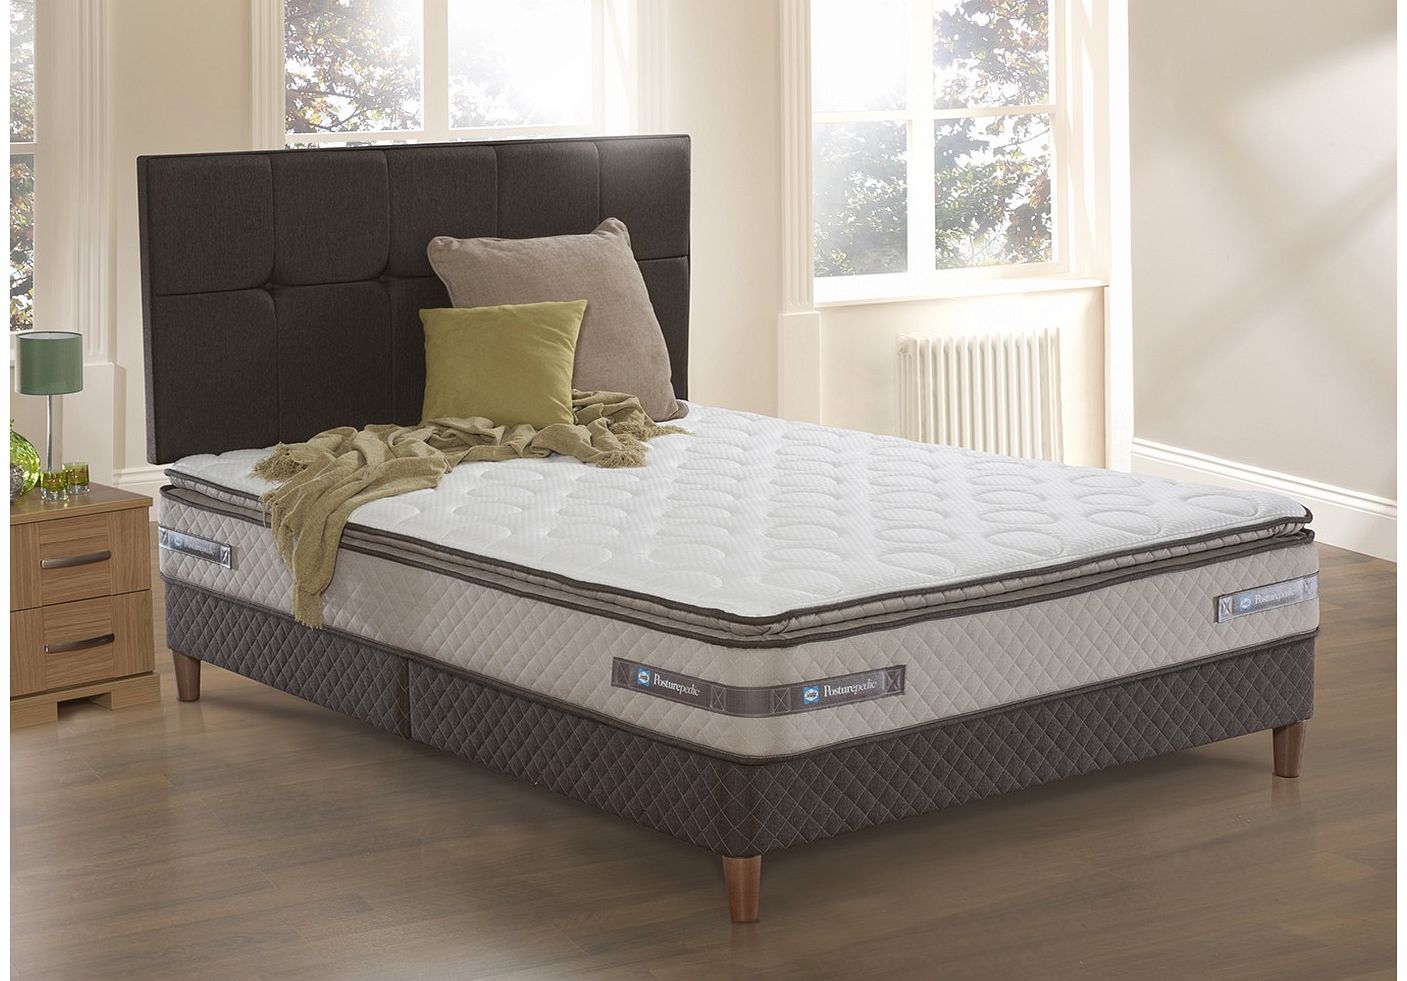 Sealy Columbus Posturetech Spring Divan Bed with